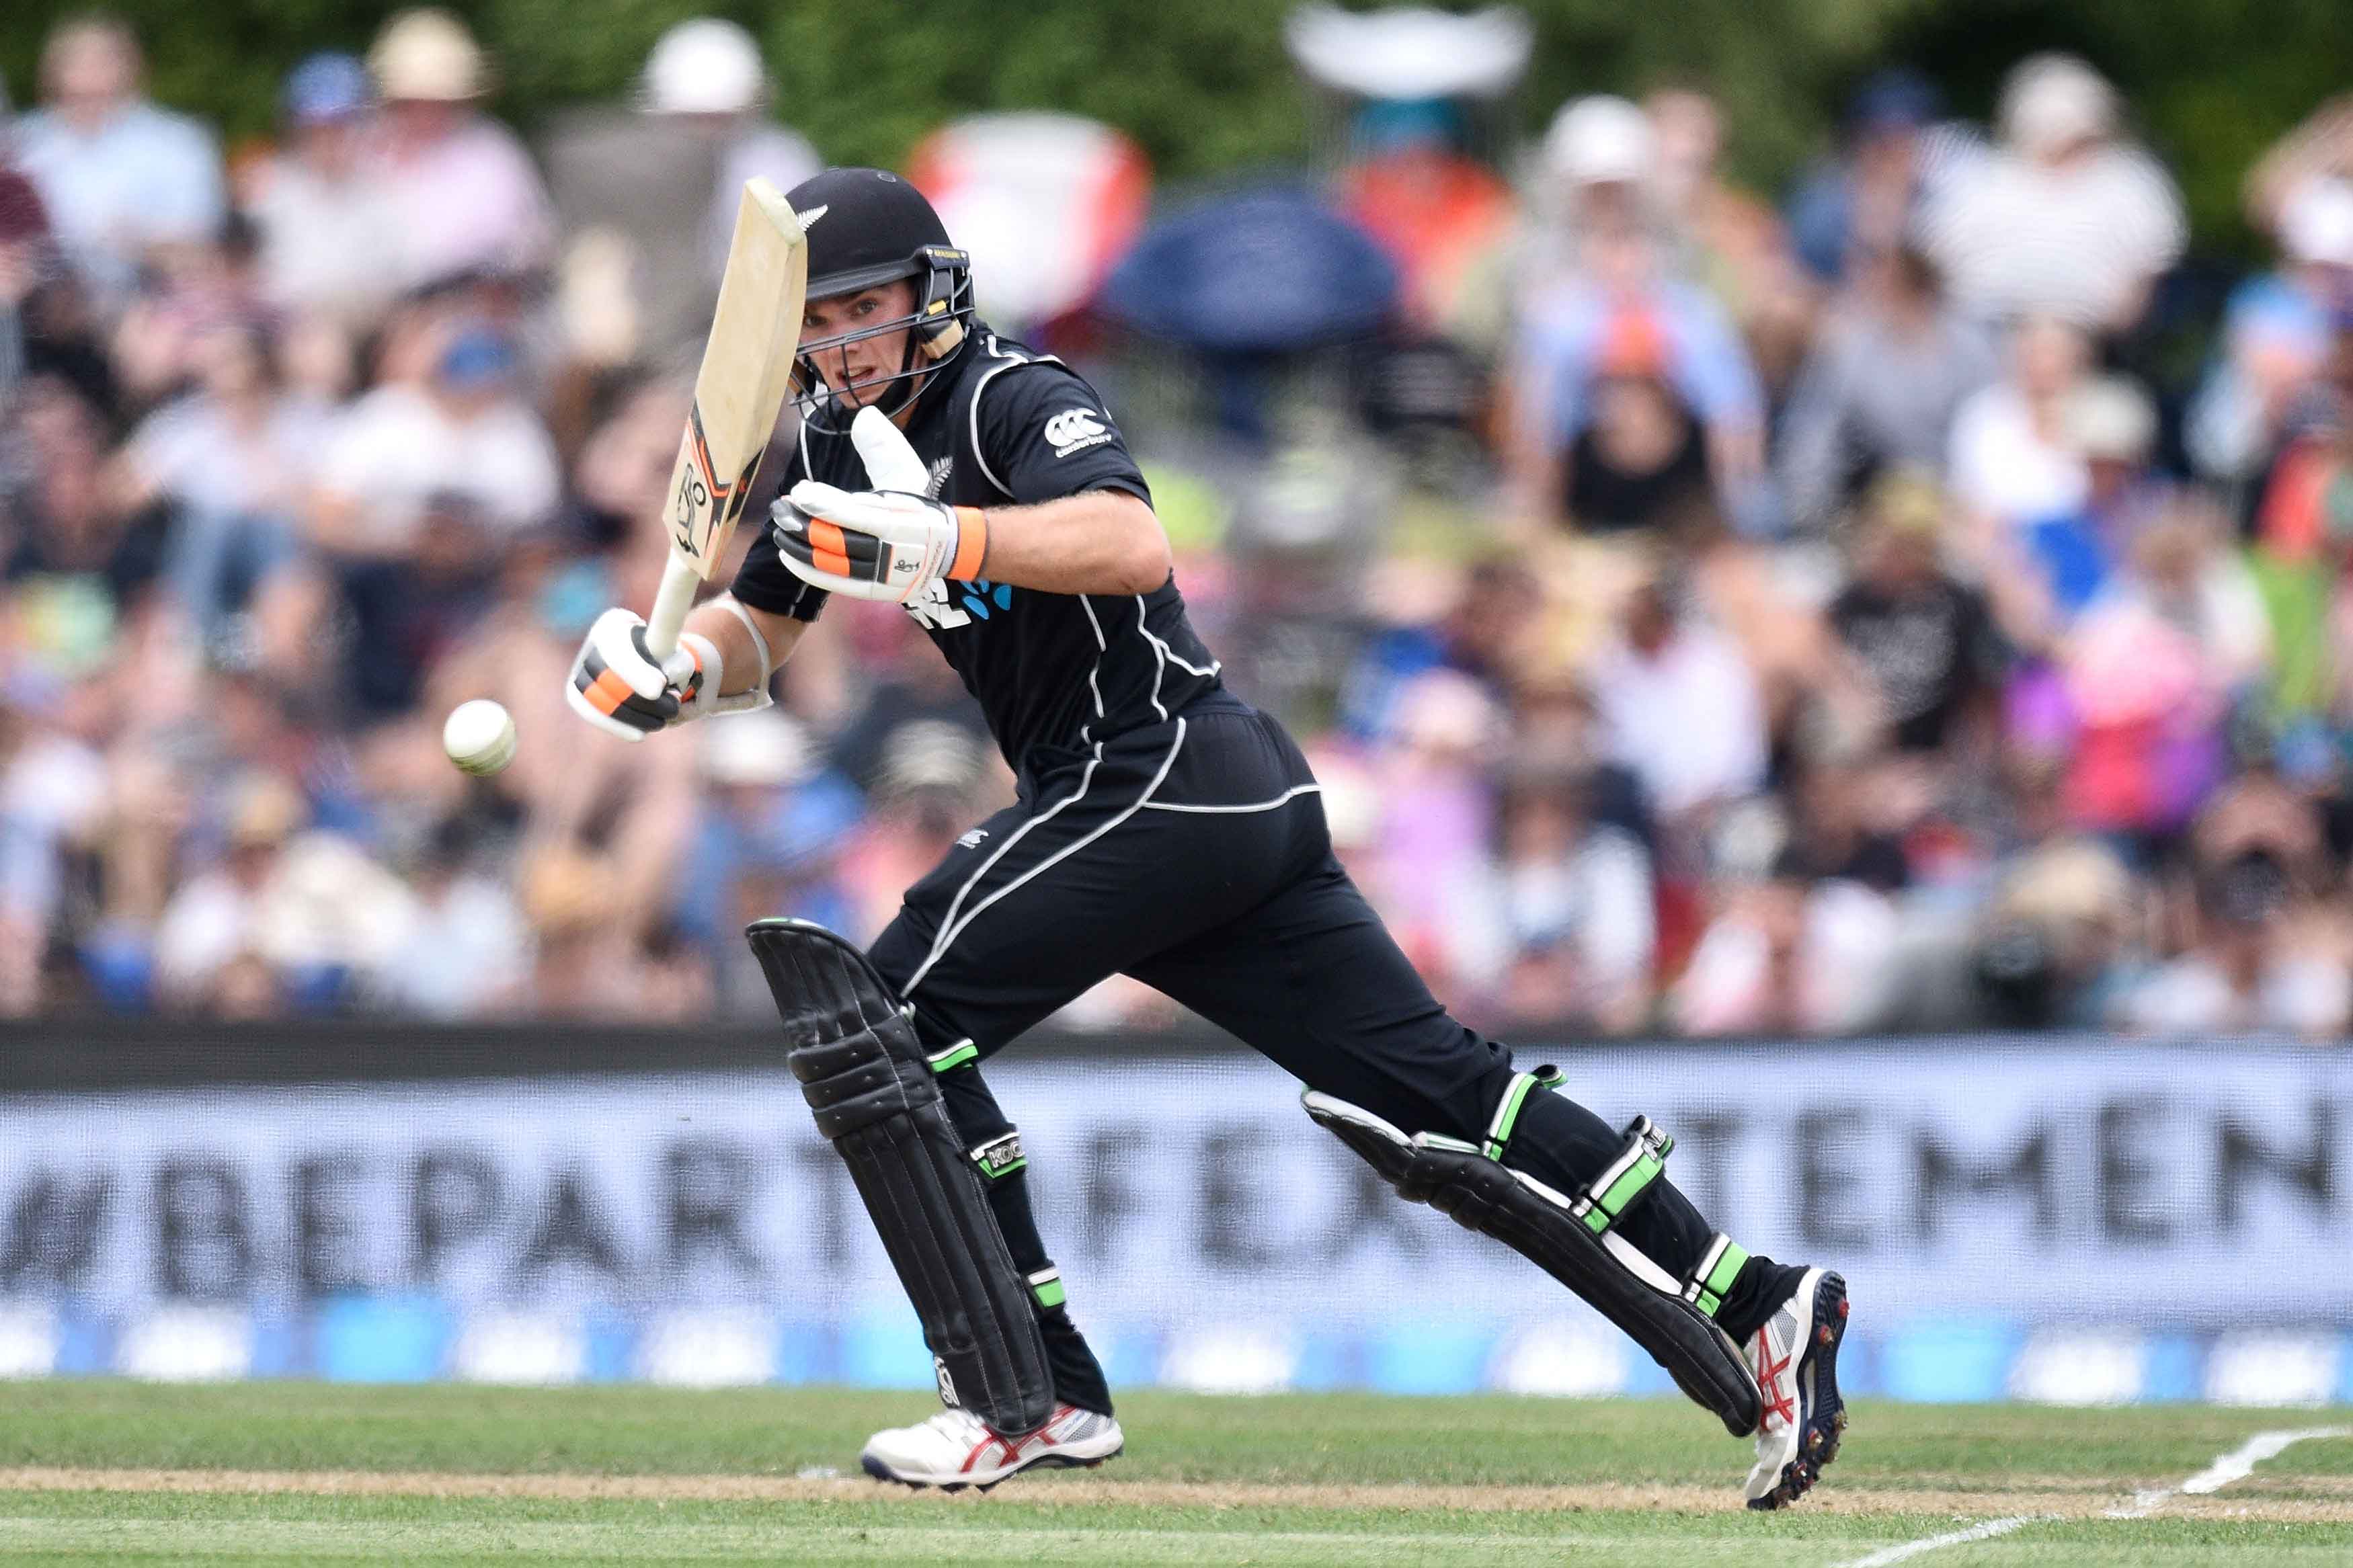 Latham’s ton leads New Zealand to comprehensive win